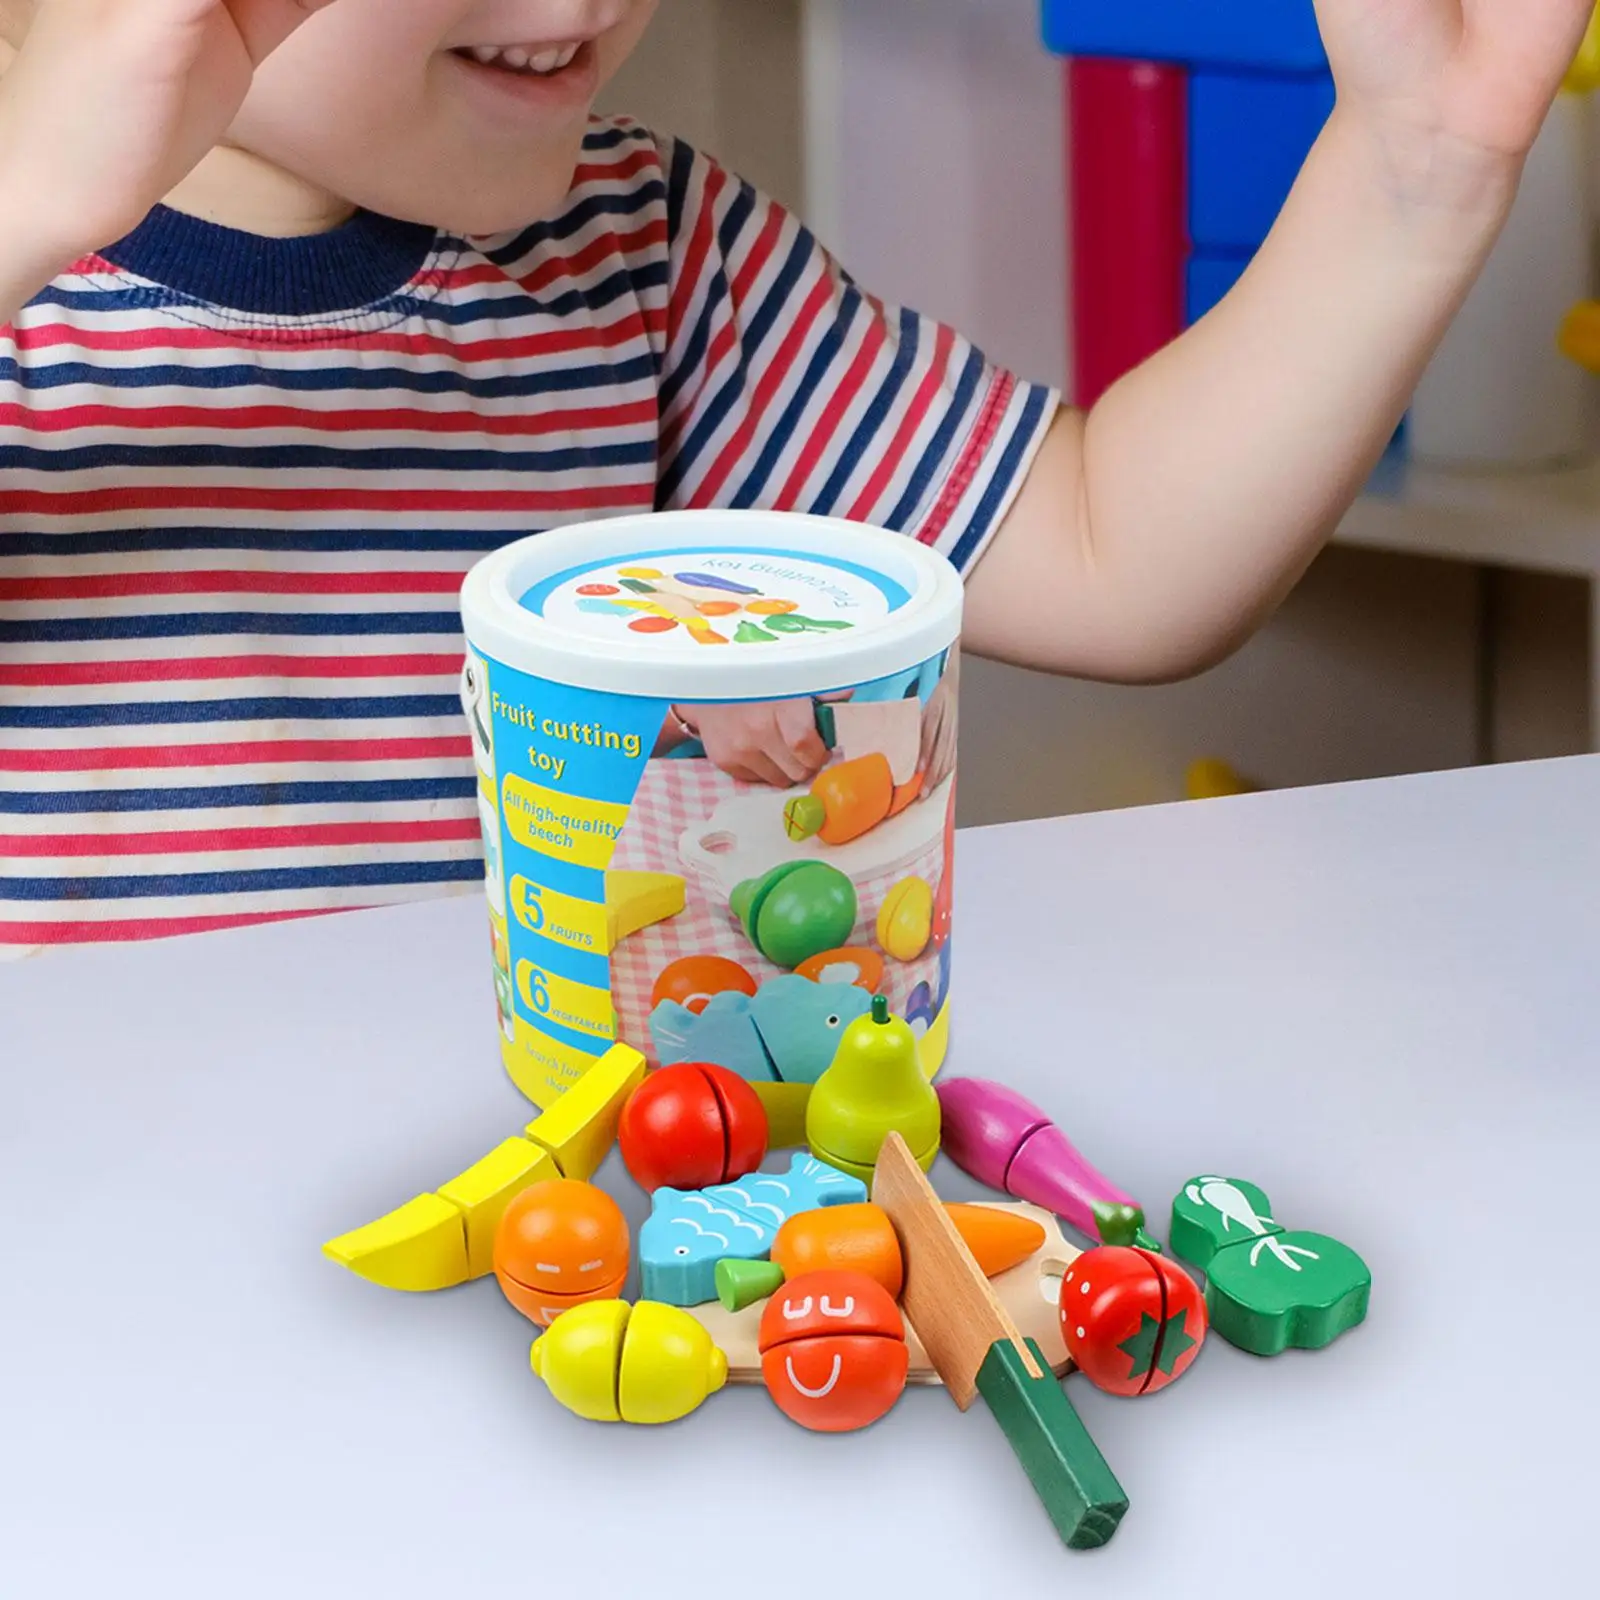 Play Food Toy Simulation Fruit Vegetable Cutting Toys Motor Skills Educational for Ages 1 2 3 Toddlers Children Party Favors